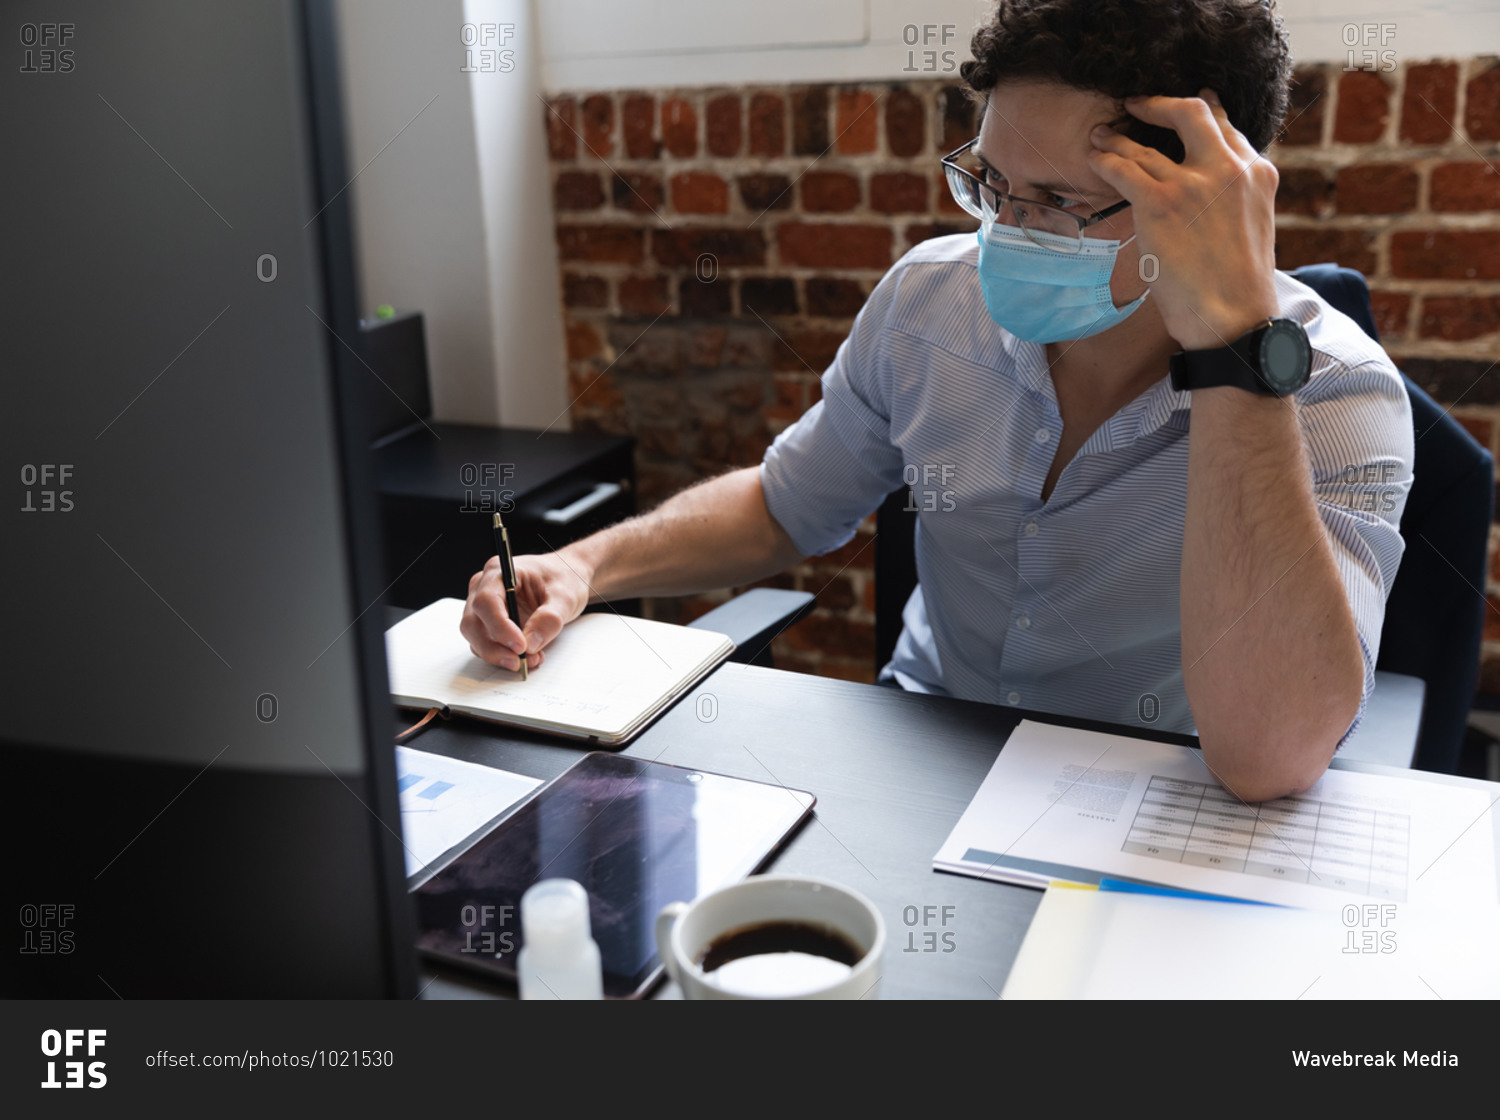 Caucasian man working in a casual office, taking notes and wearing face mask. Social distancing in the workplace during Coronavirus Covid 19 pandemic.